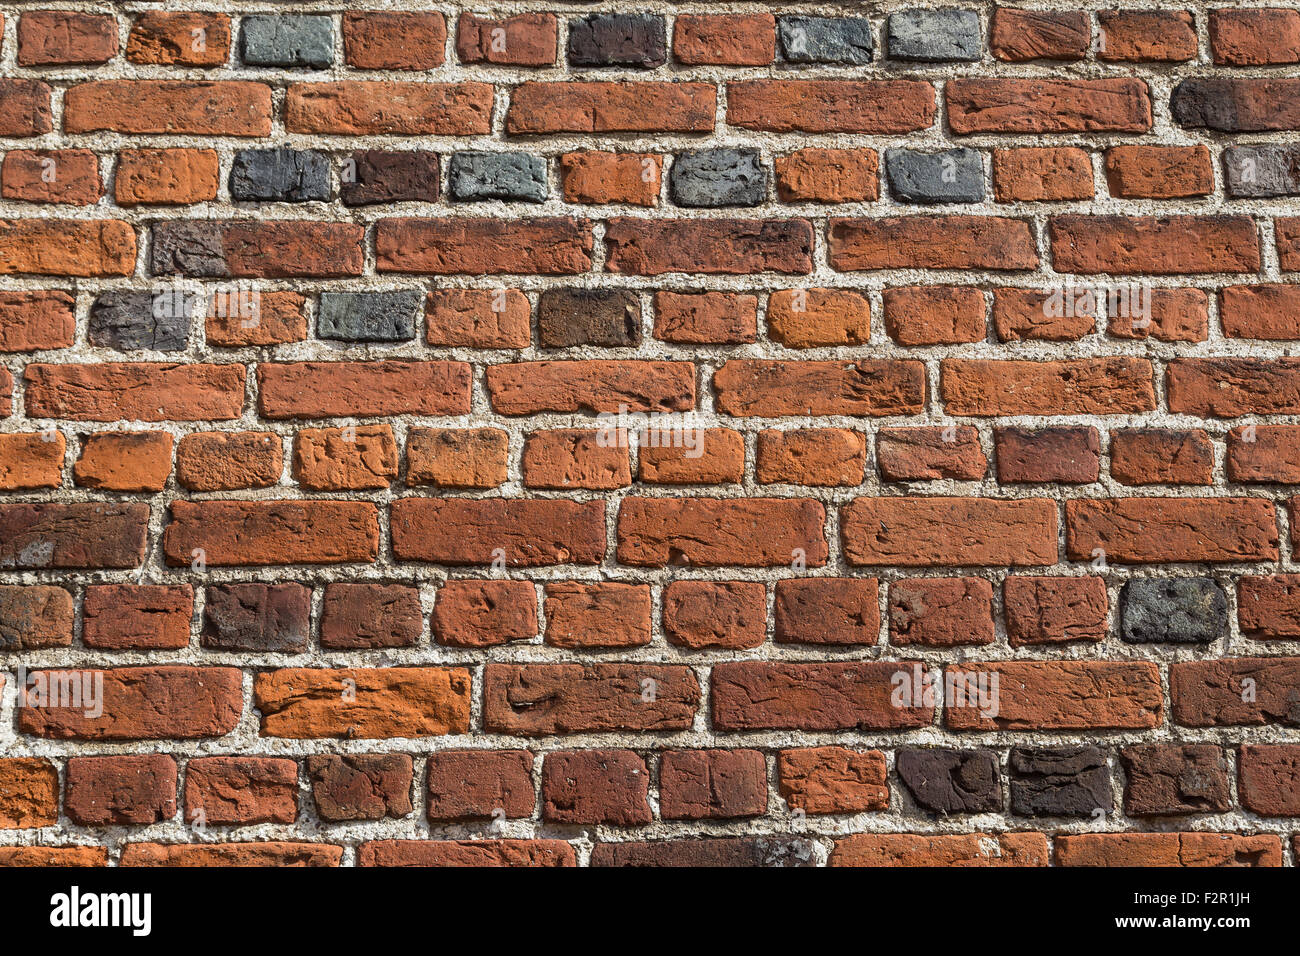 Photograph of a red brick wall in horizontal pattern. Stock Photo